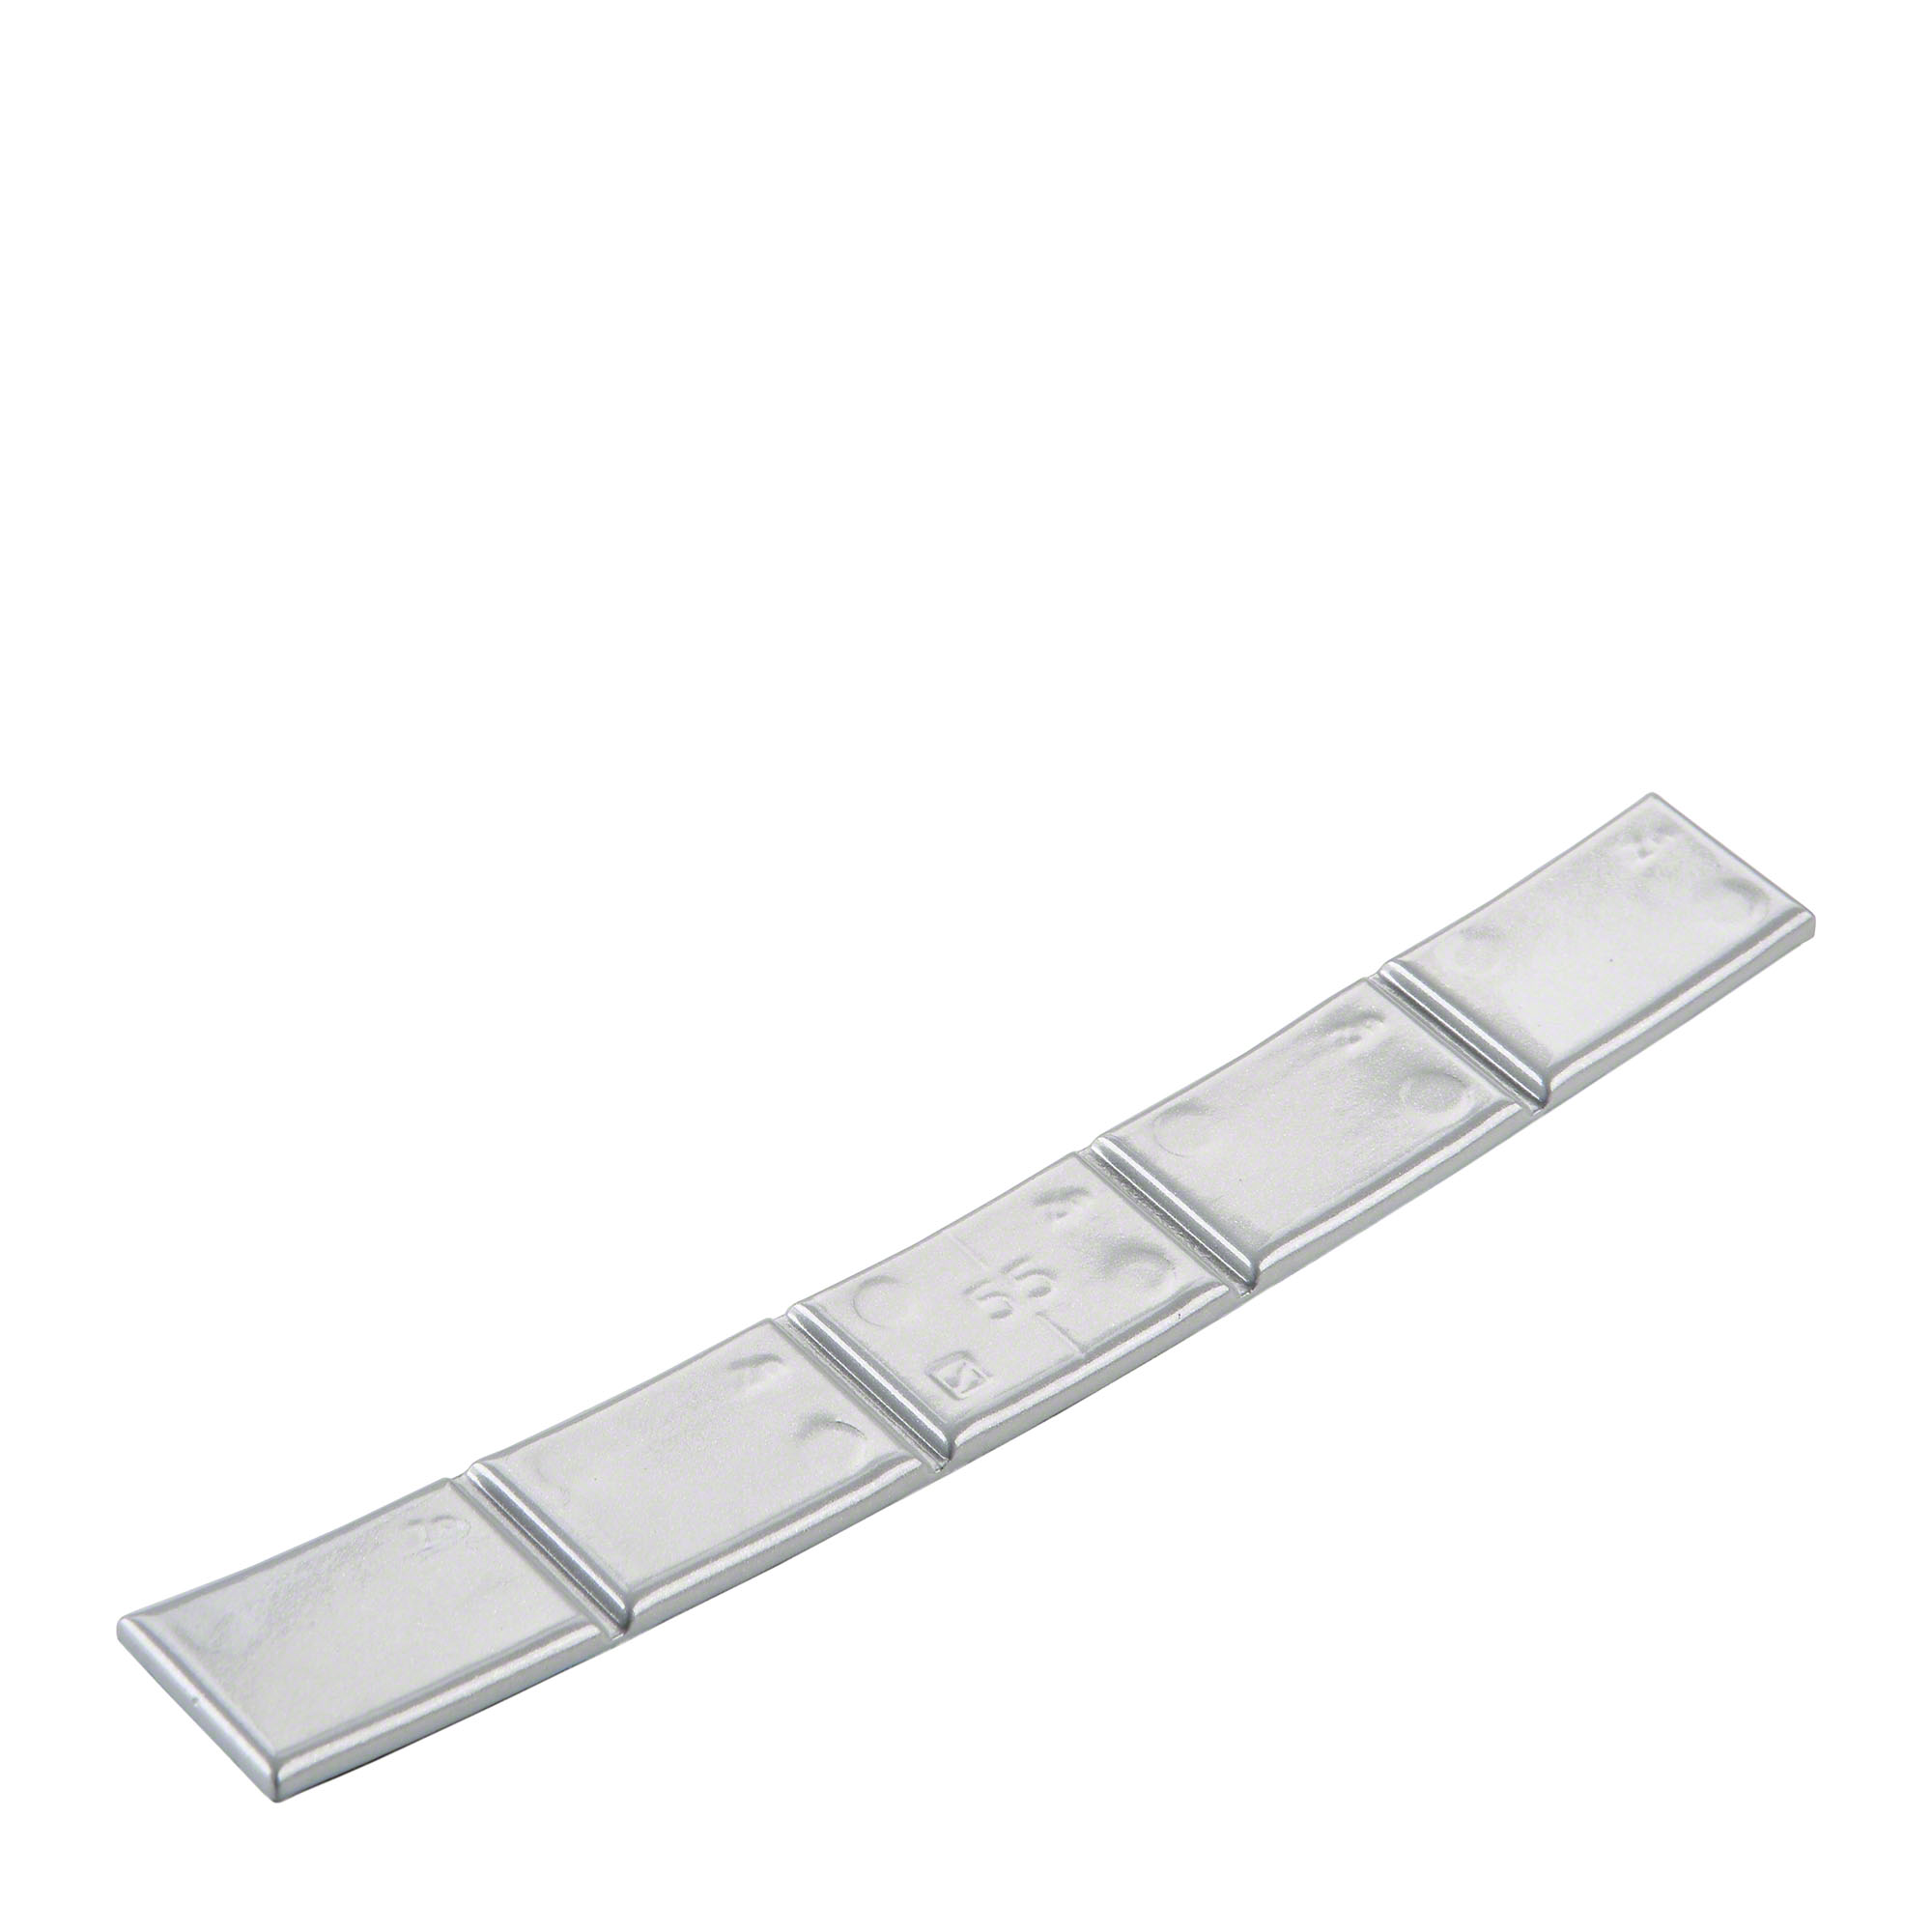 adhesive weight - Typ 361, 55 g, zinc, silver